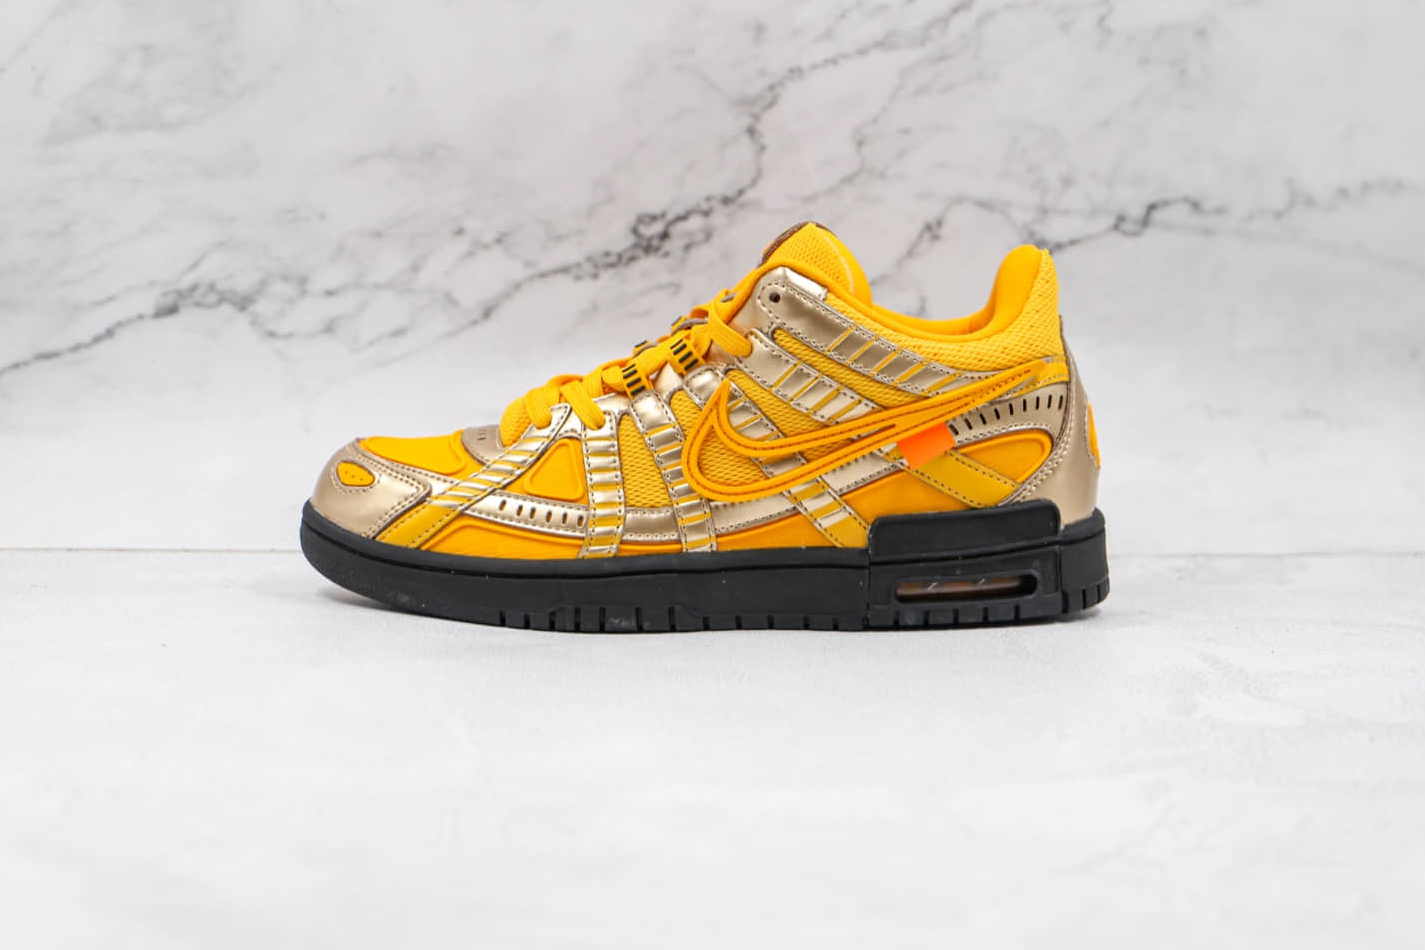 Nike Off-White x Air Rubber Dunk 'University Gold' CU6015-700 - Latest Release | Limited Edition Available